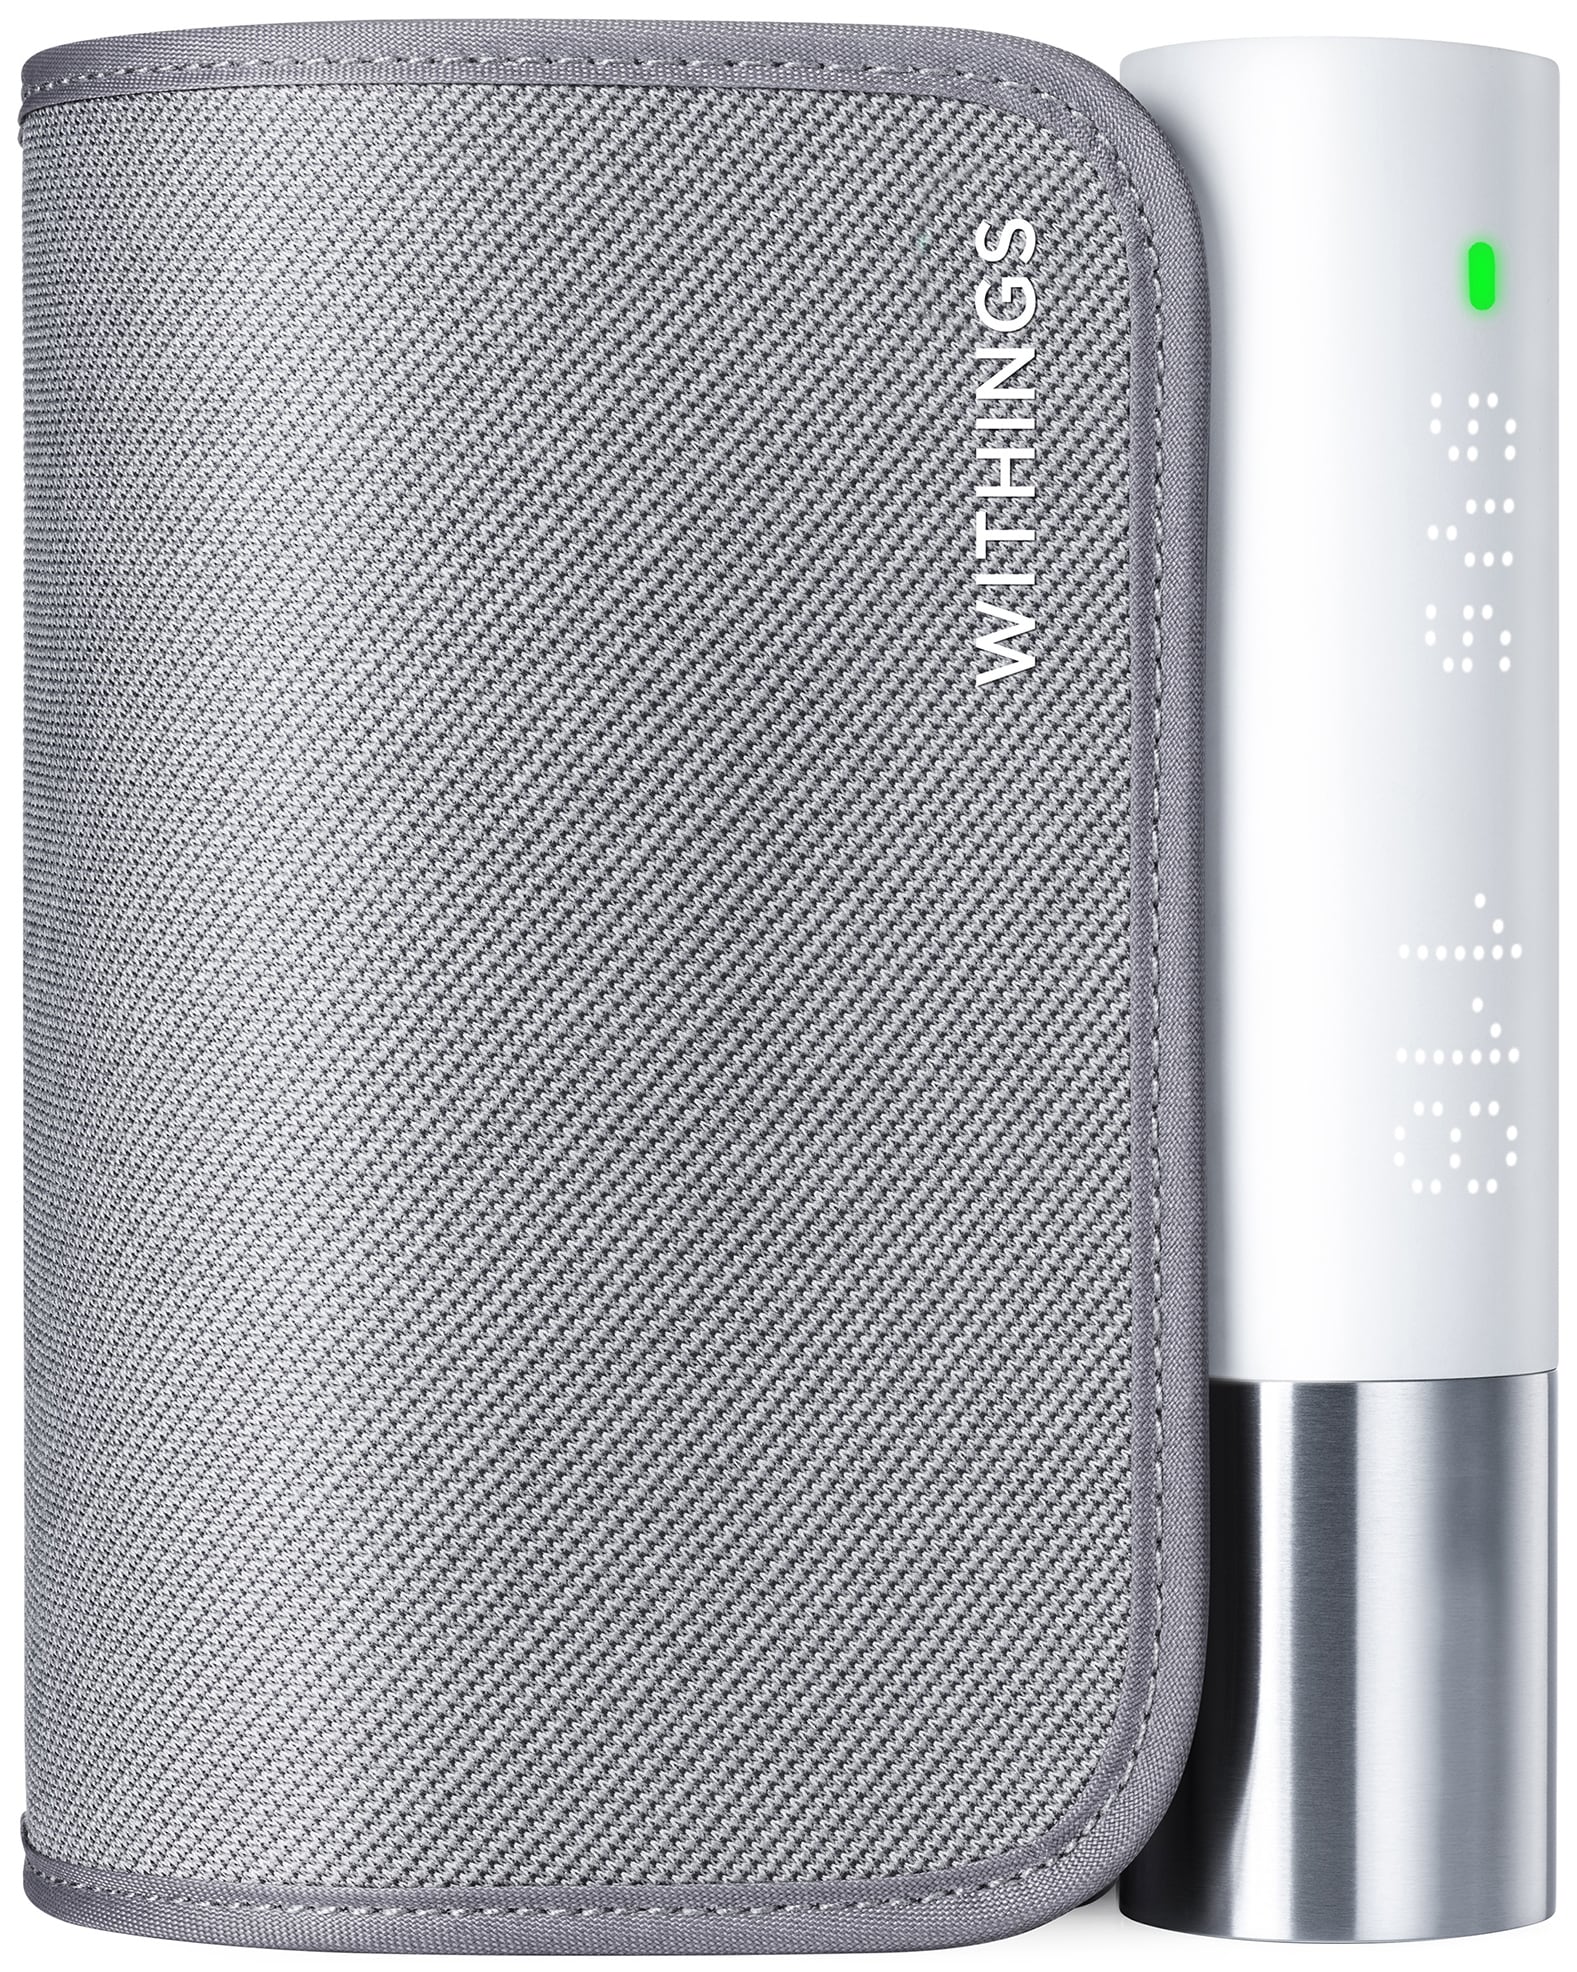 7: Withings Core smart blodtryksmåler WITBPM550067